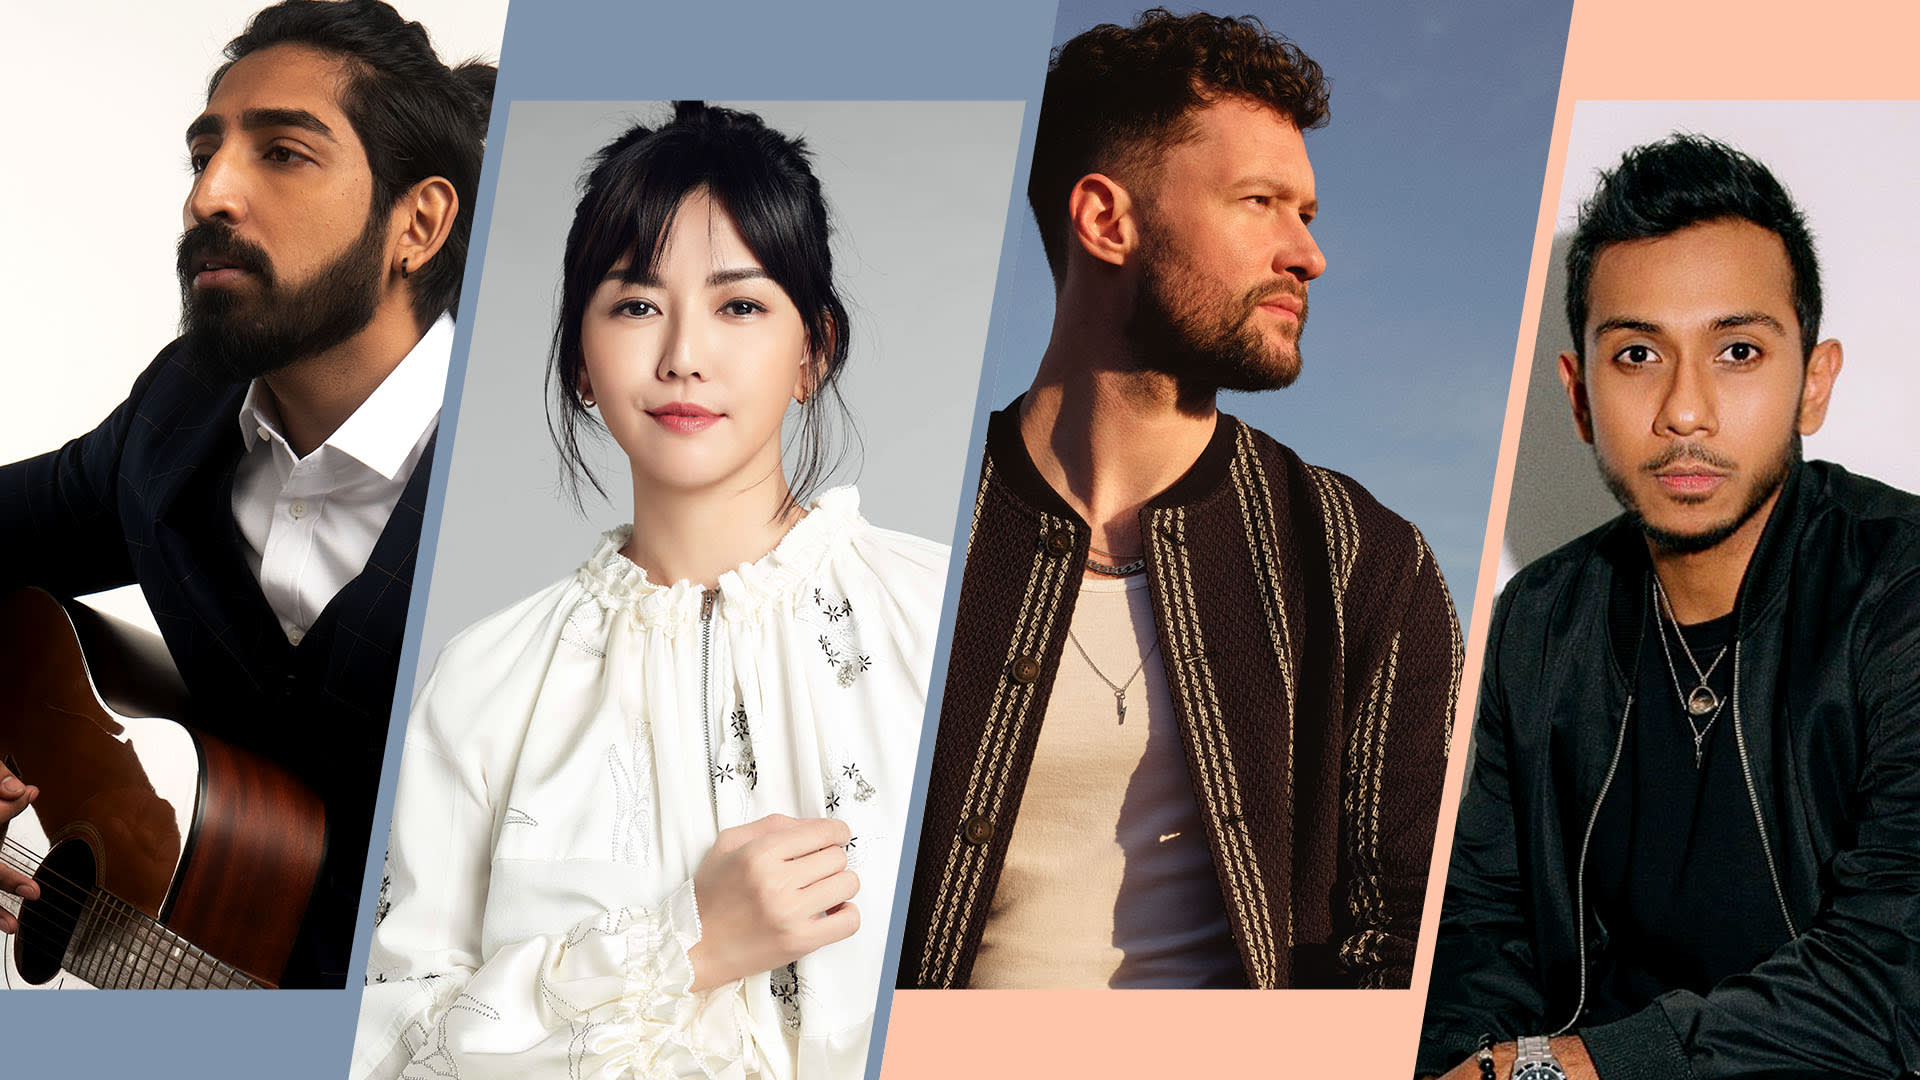 Stefanie Sun, Taufik Batisah, Calum Scott And Other Celebs To Perform At President’s Star Charity On Oct 10